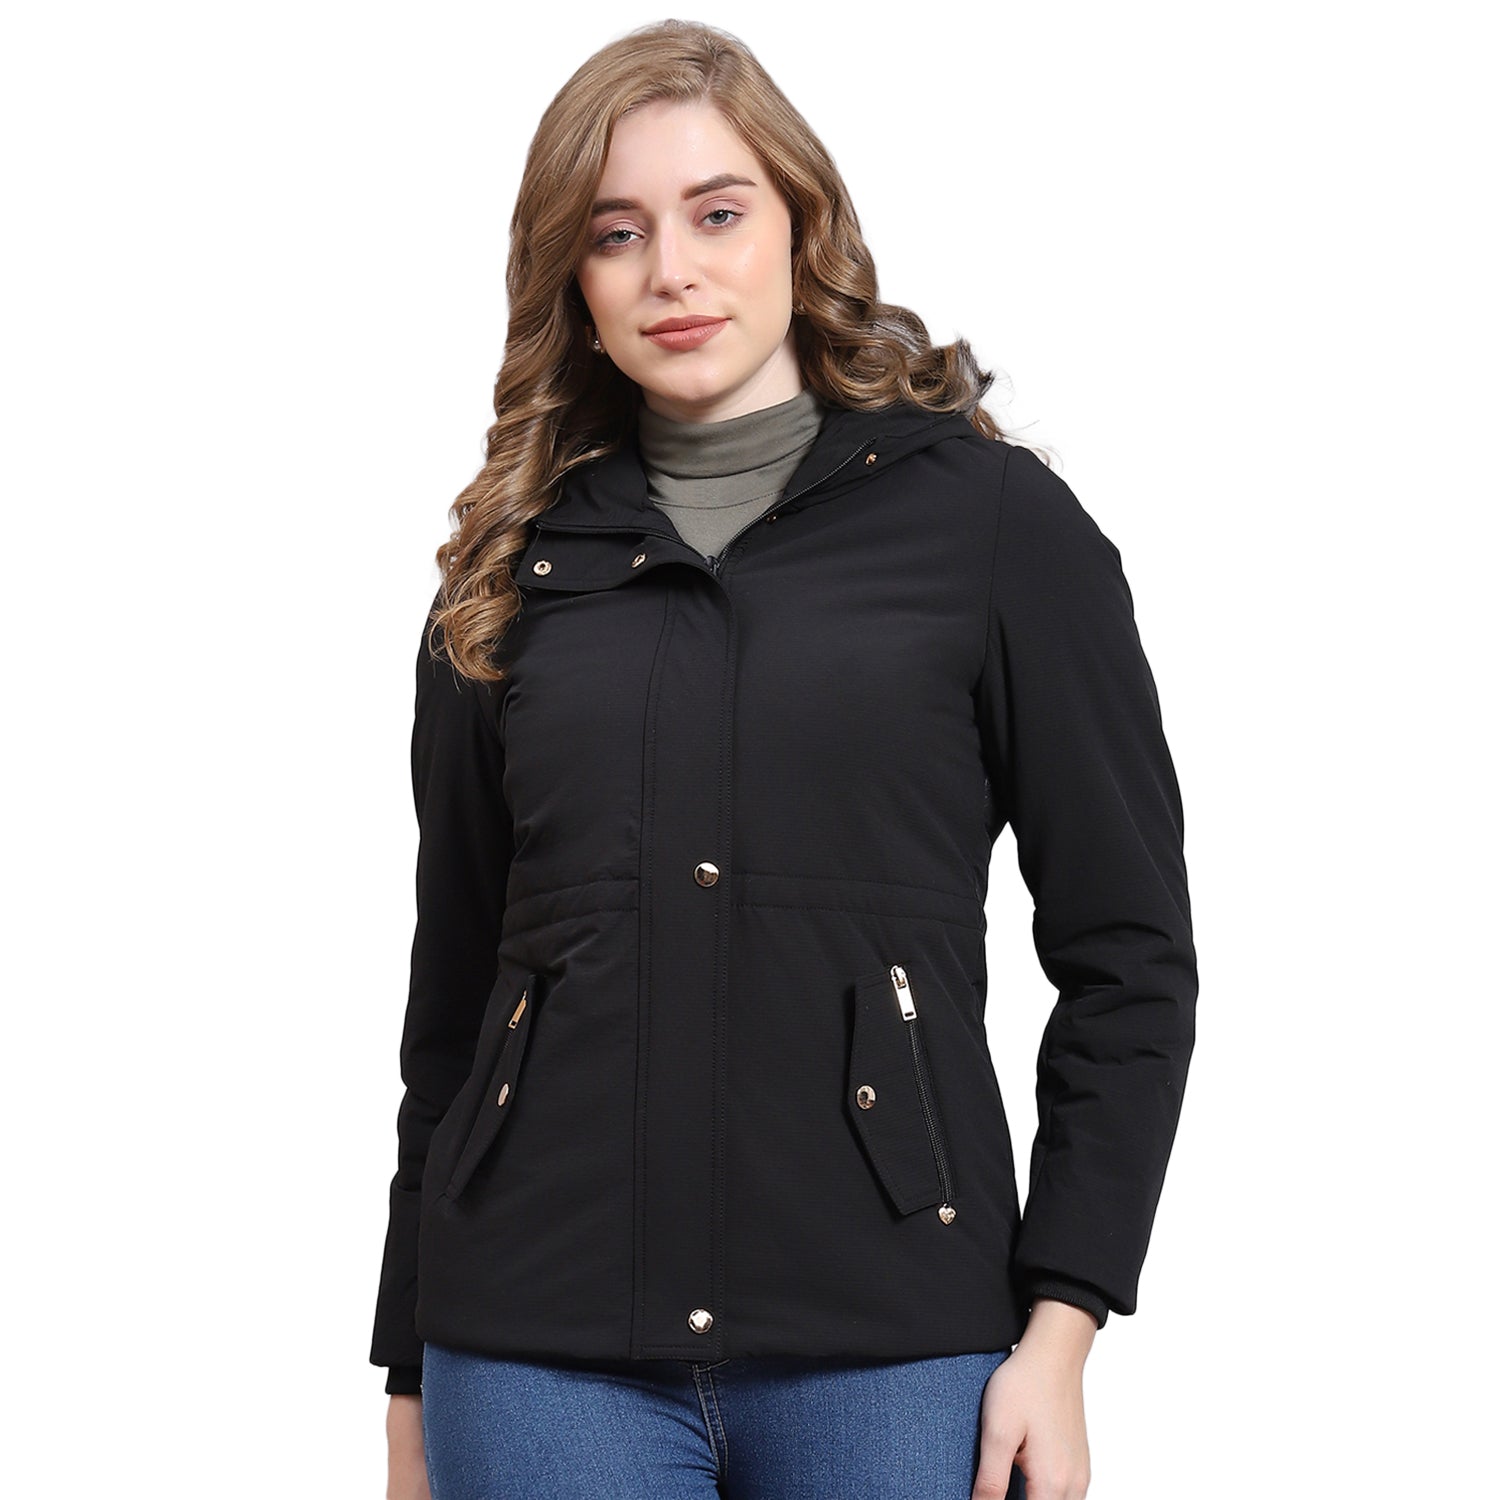 Women Black Hooded Jacket with Attached Inflatable Neck Pillow